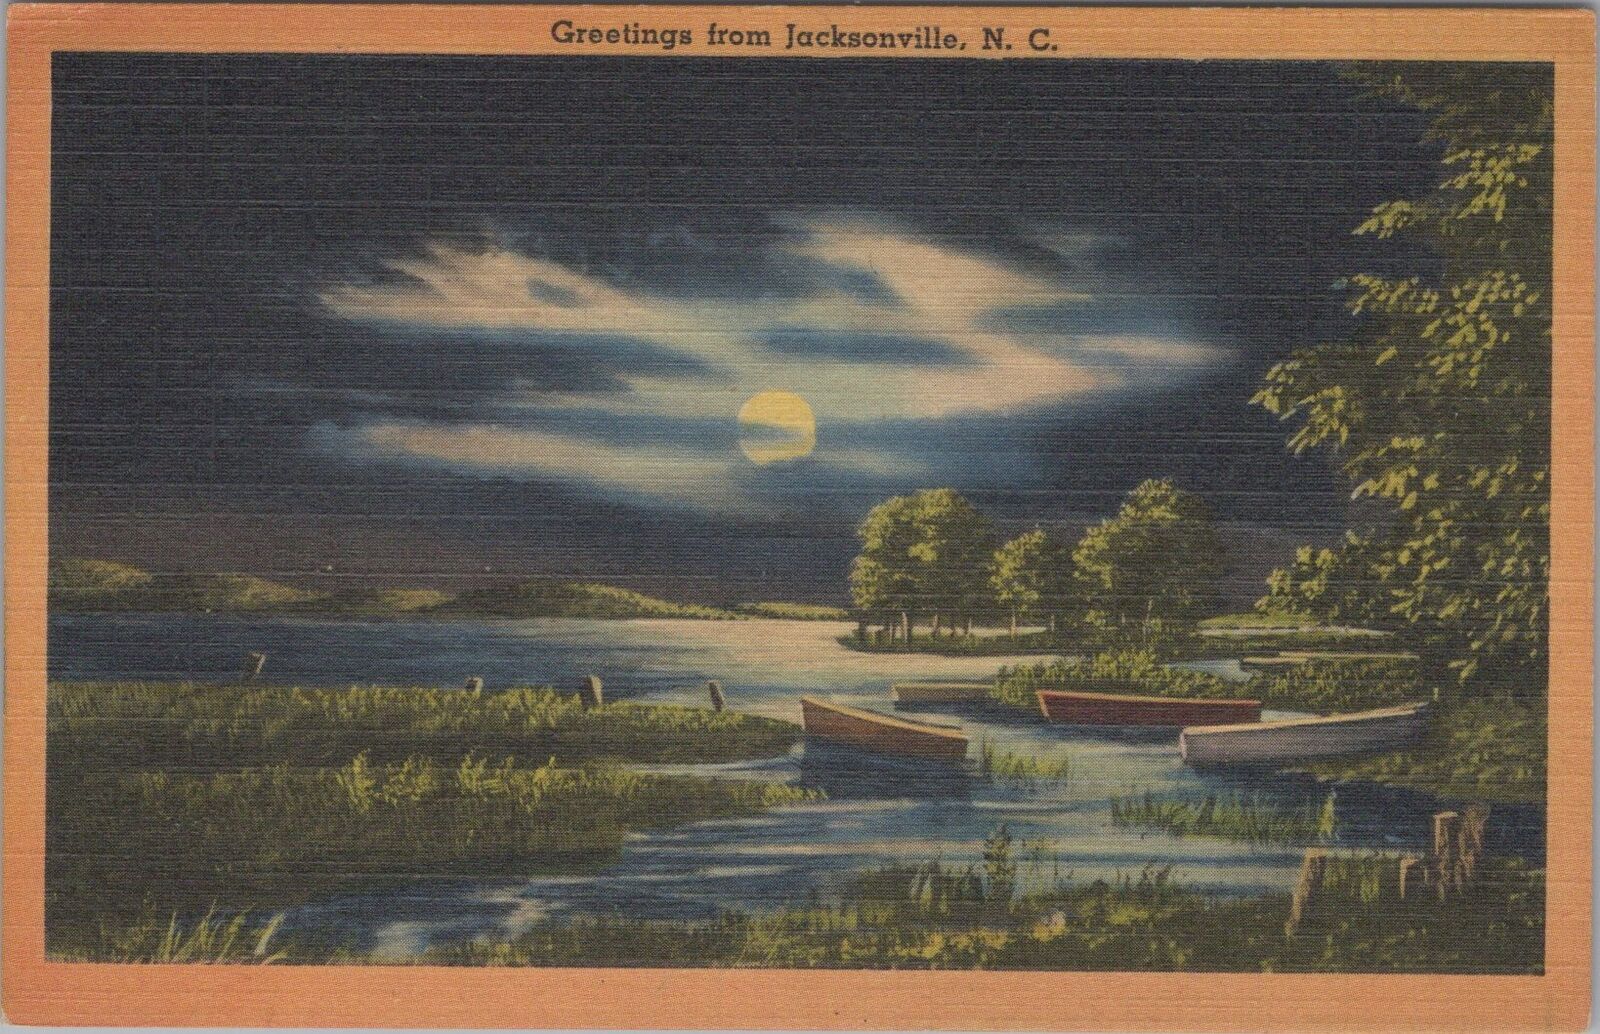 ZAYIX Postcard Rare Greetings from Jacksonville NC Rowboat Moon Linen 102022PC48